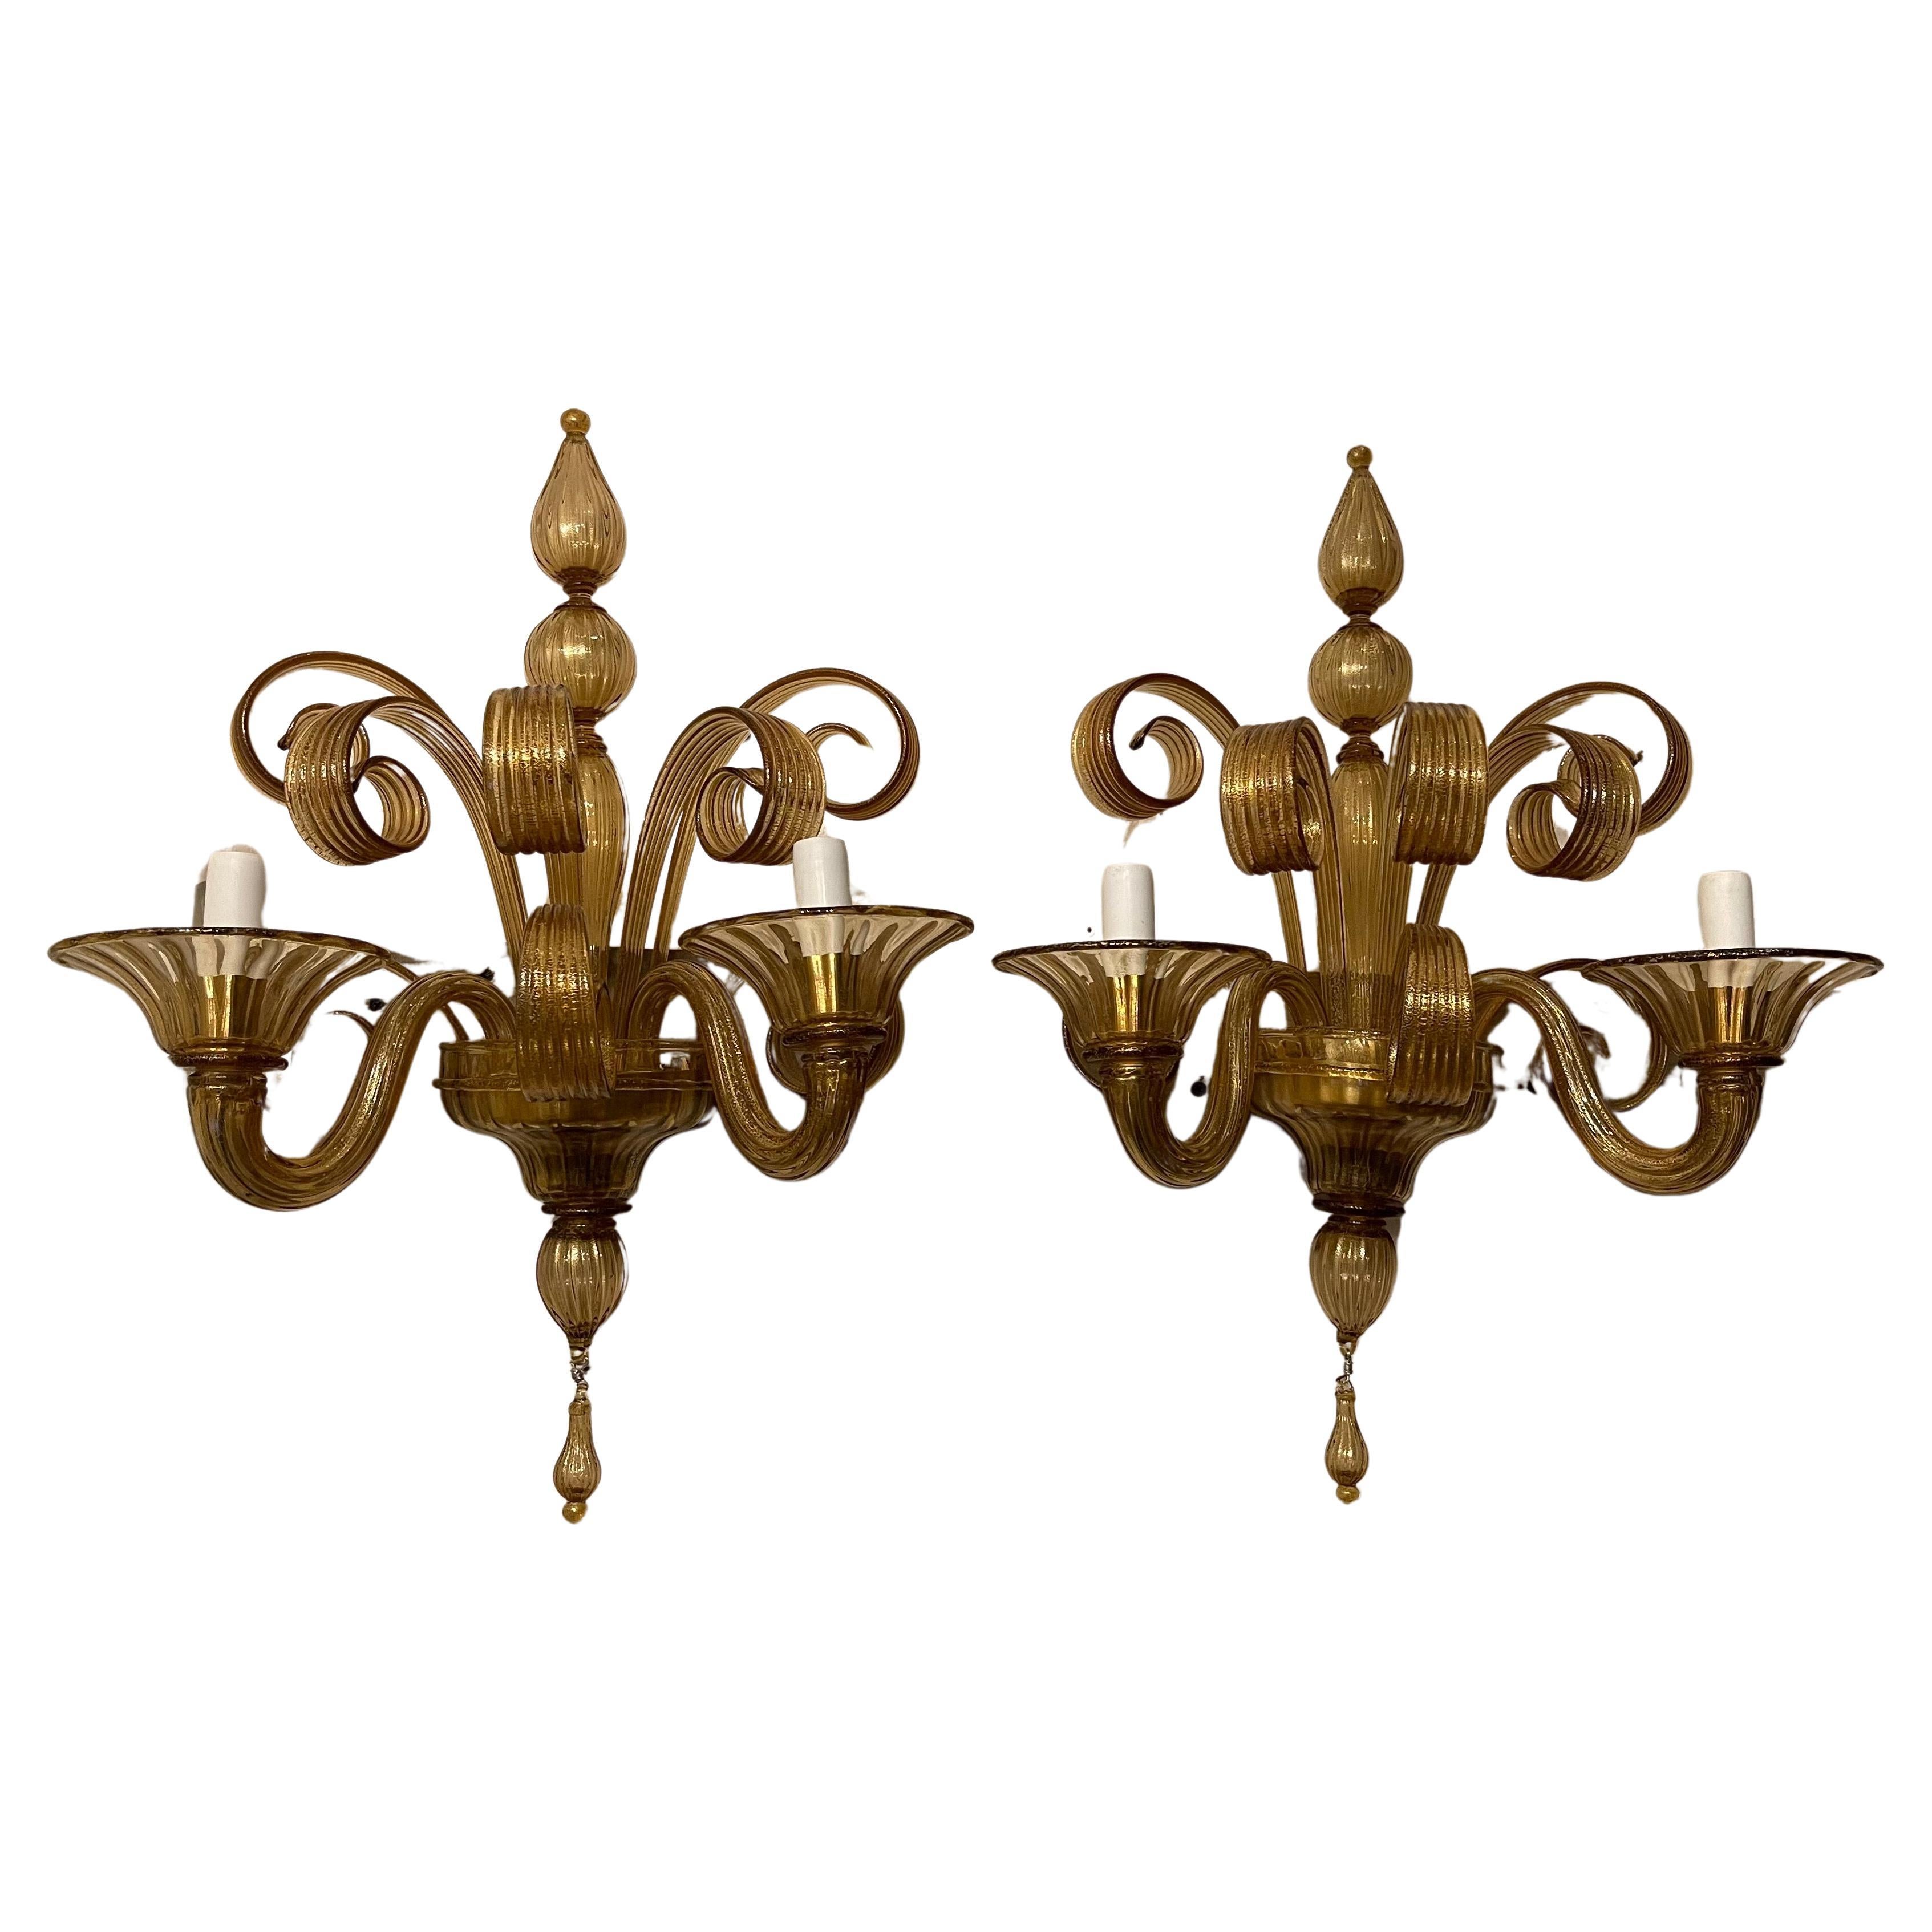 Lorin Marsh Wall Lights and Sconces